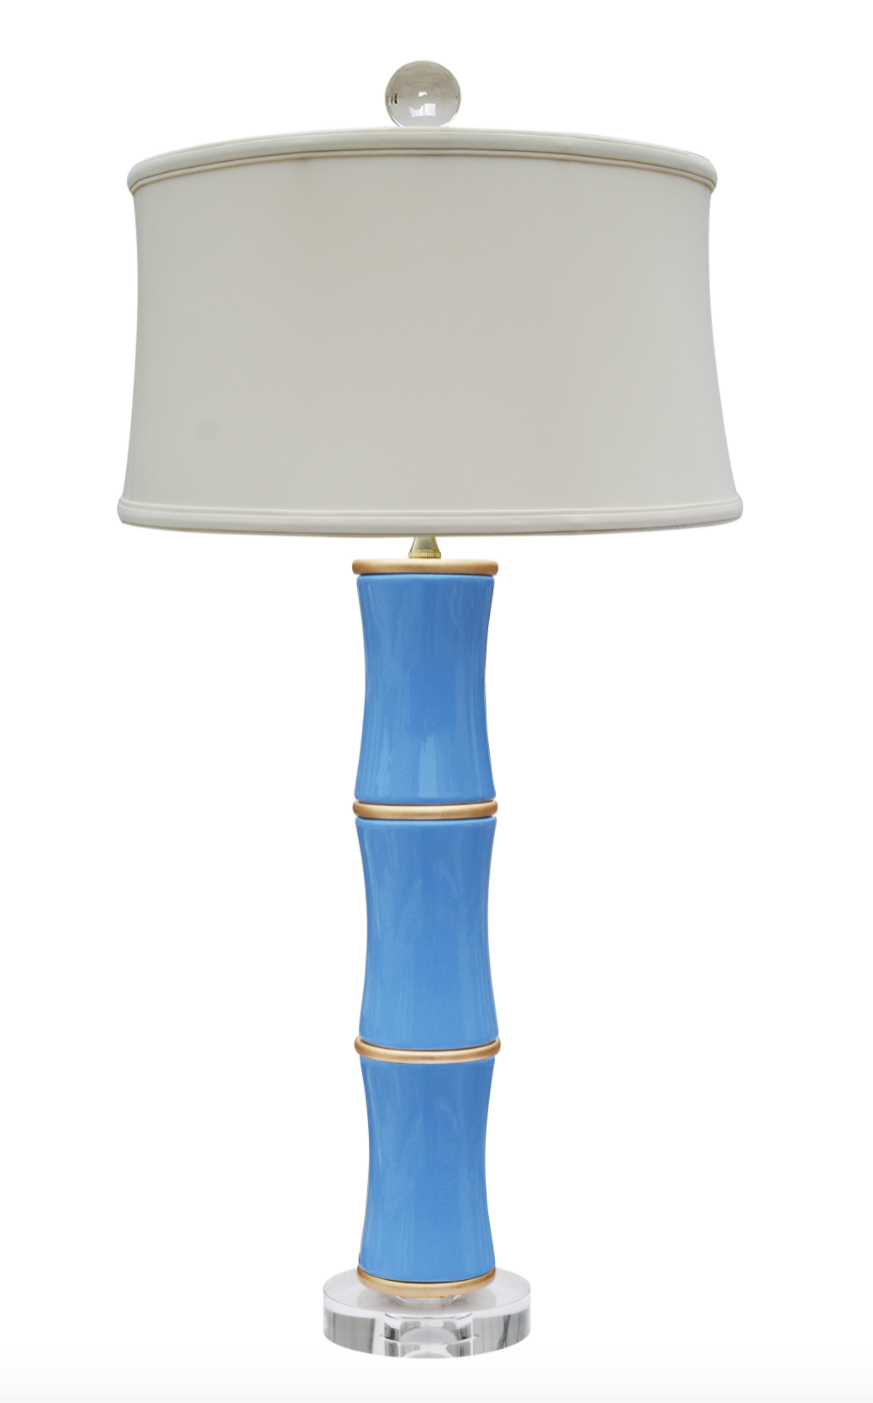 Porcelain French Blue Bamboo Lamp